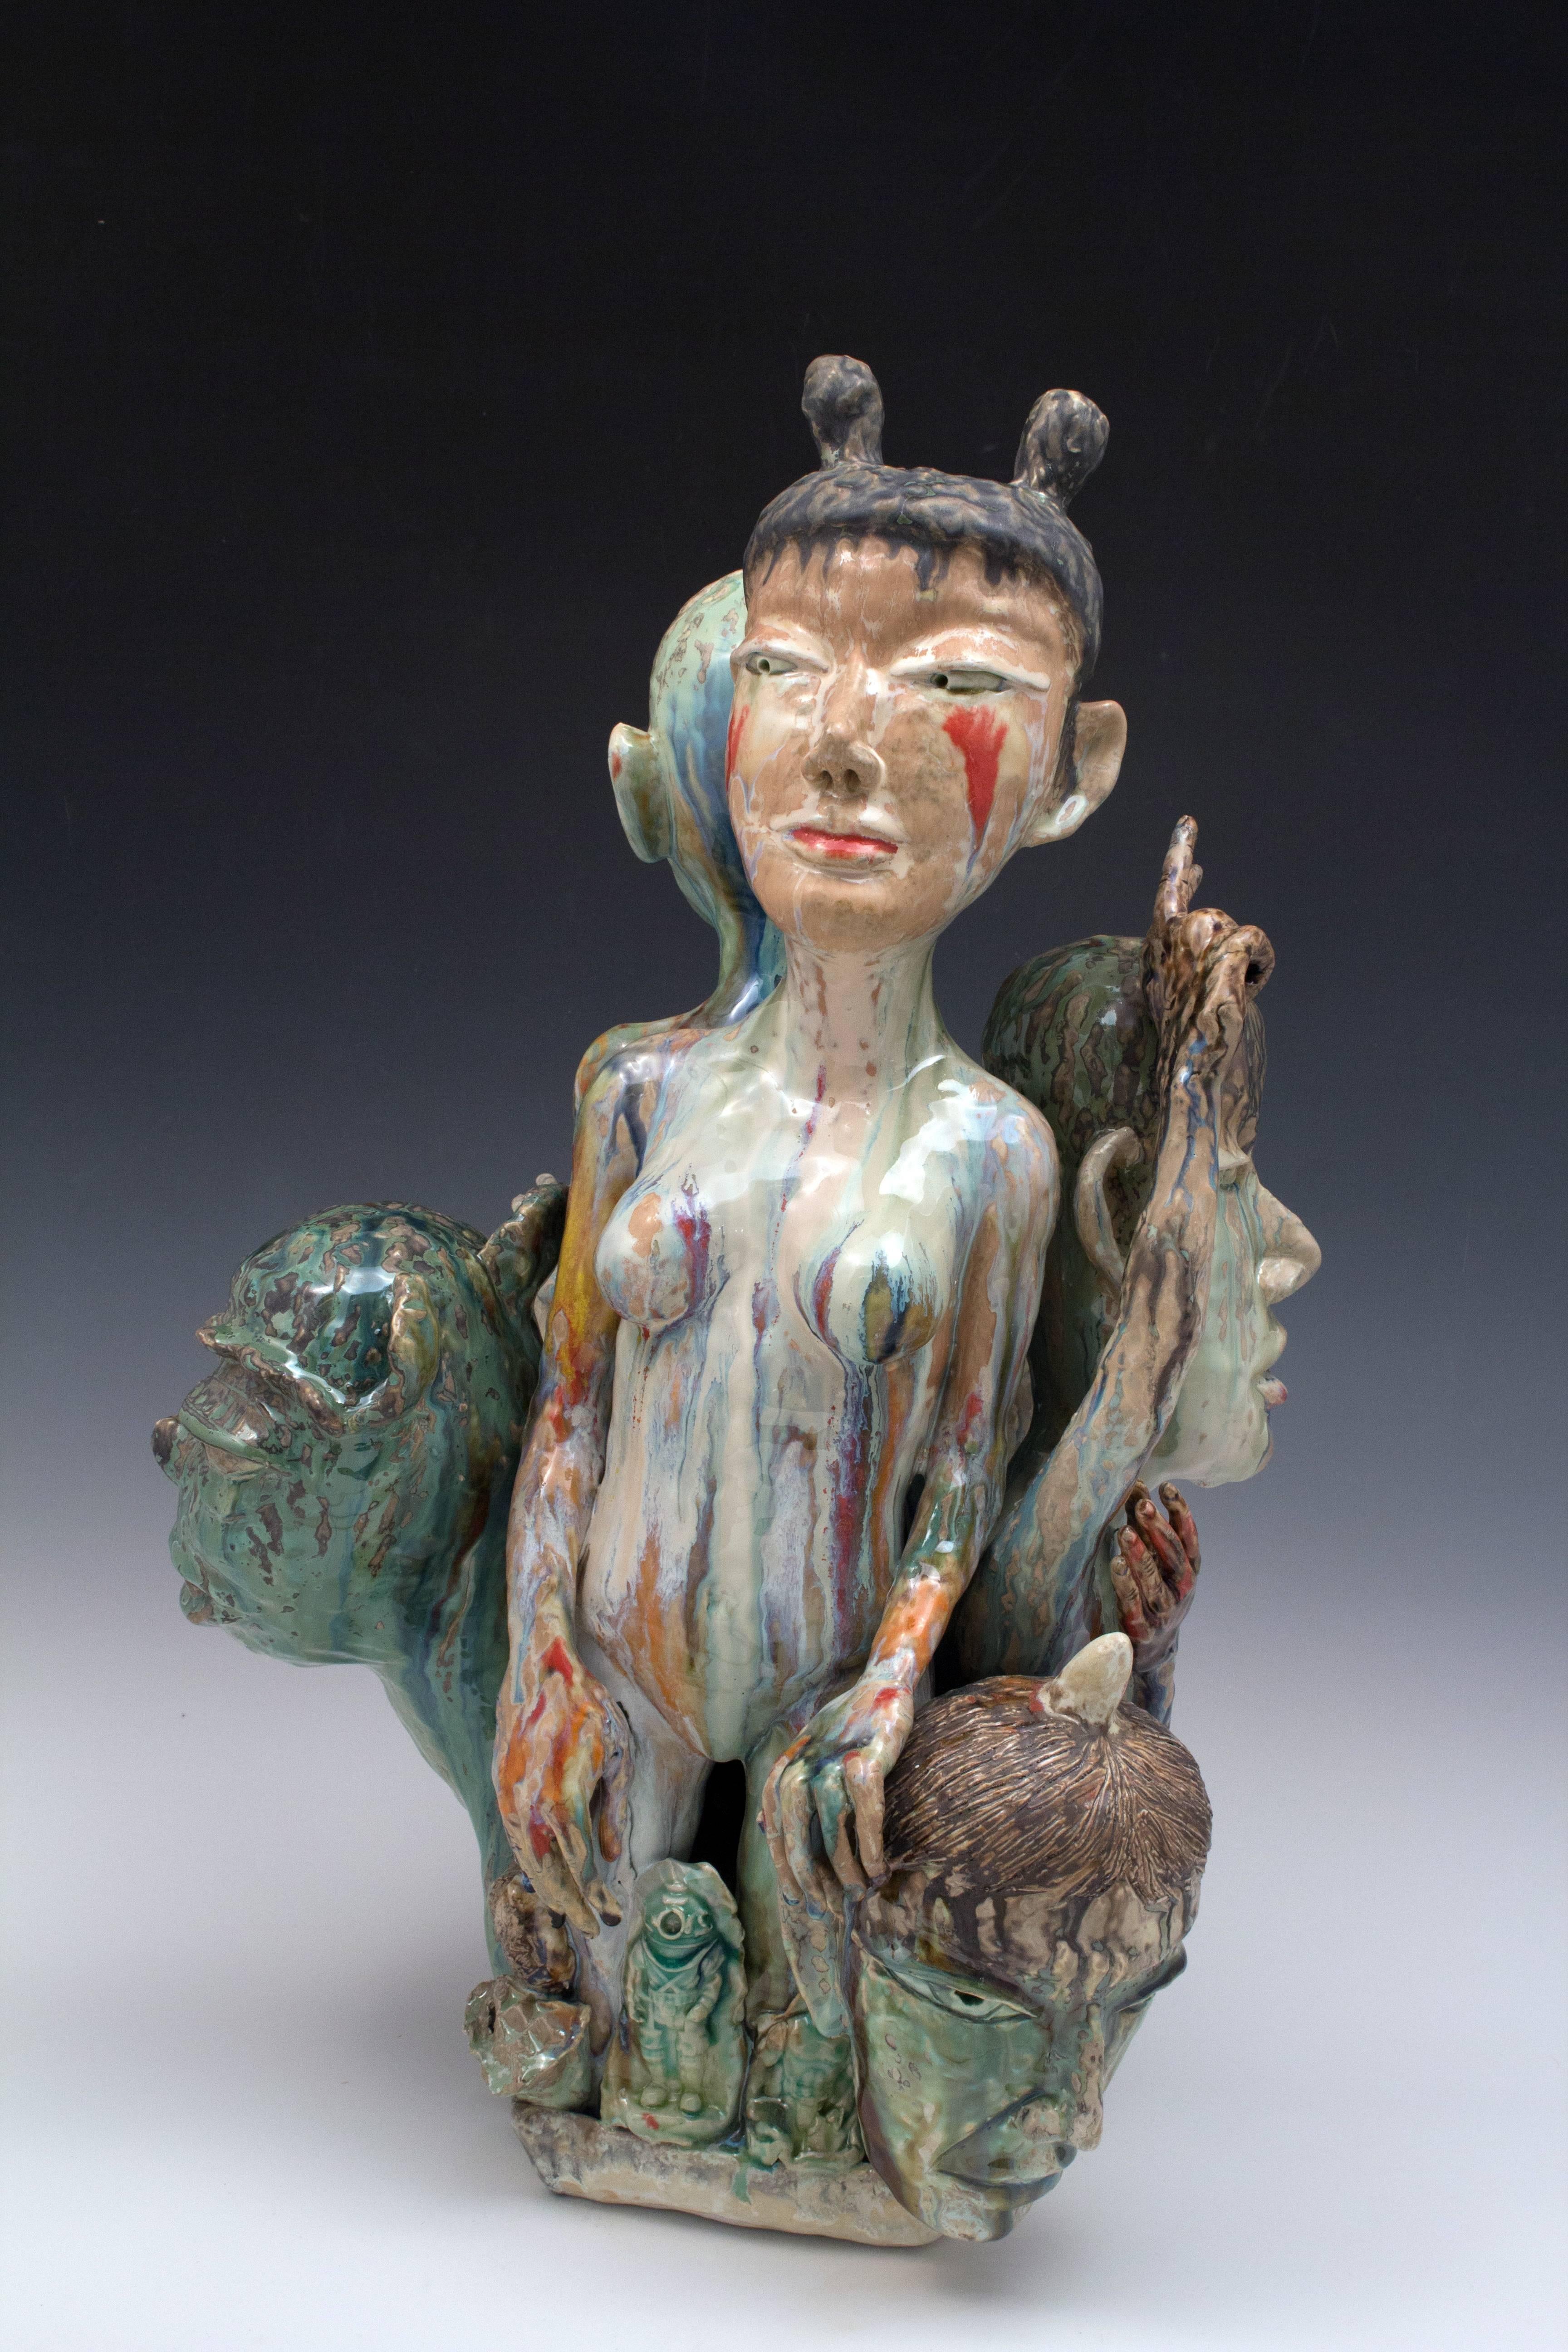 The ceramic sculptures of SunKoo Yuh are composed of tight groupings of various forms including plants, animals, fish, and human figures. While Korean art, Buddhism, and Confucian beliefs inform some aspects of his imagery, implied narratives that